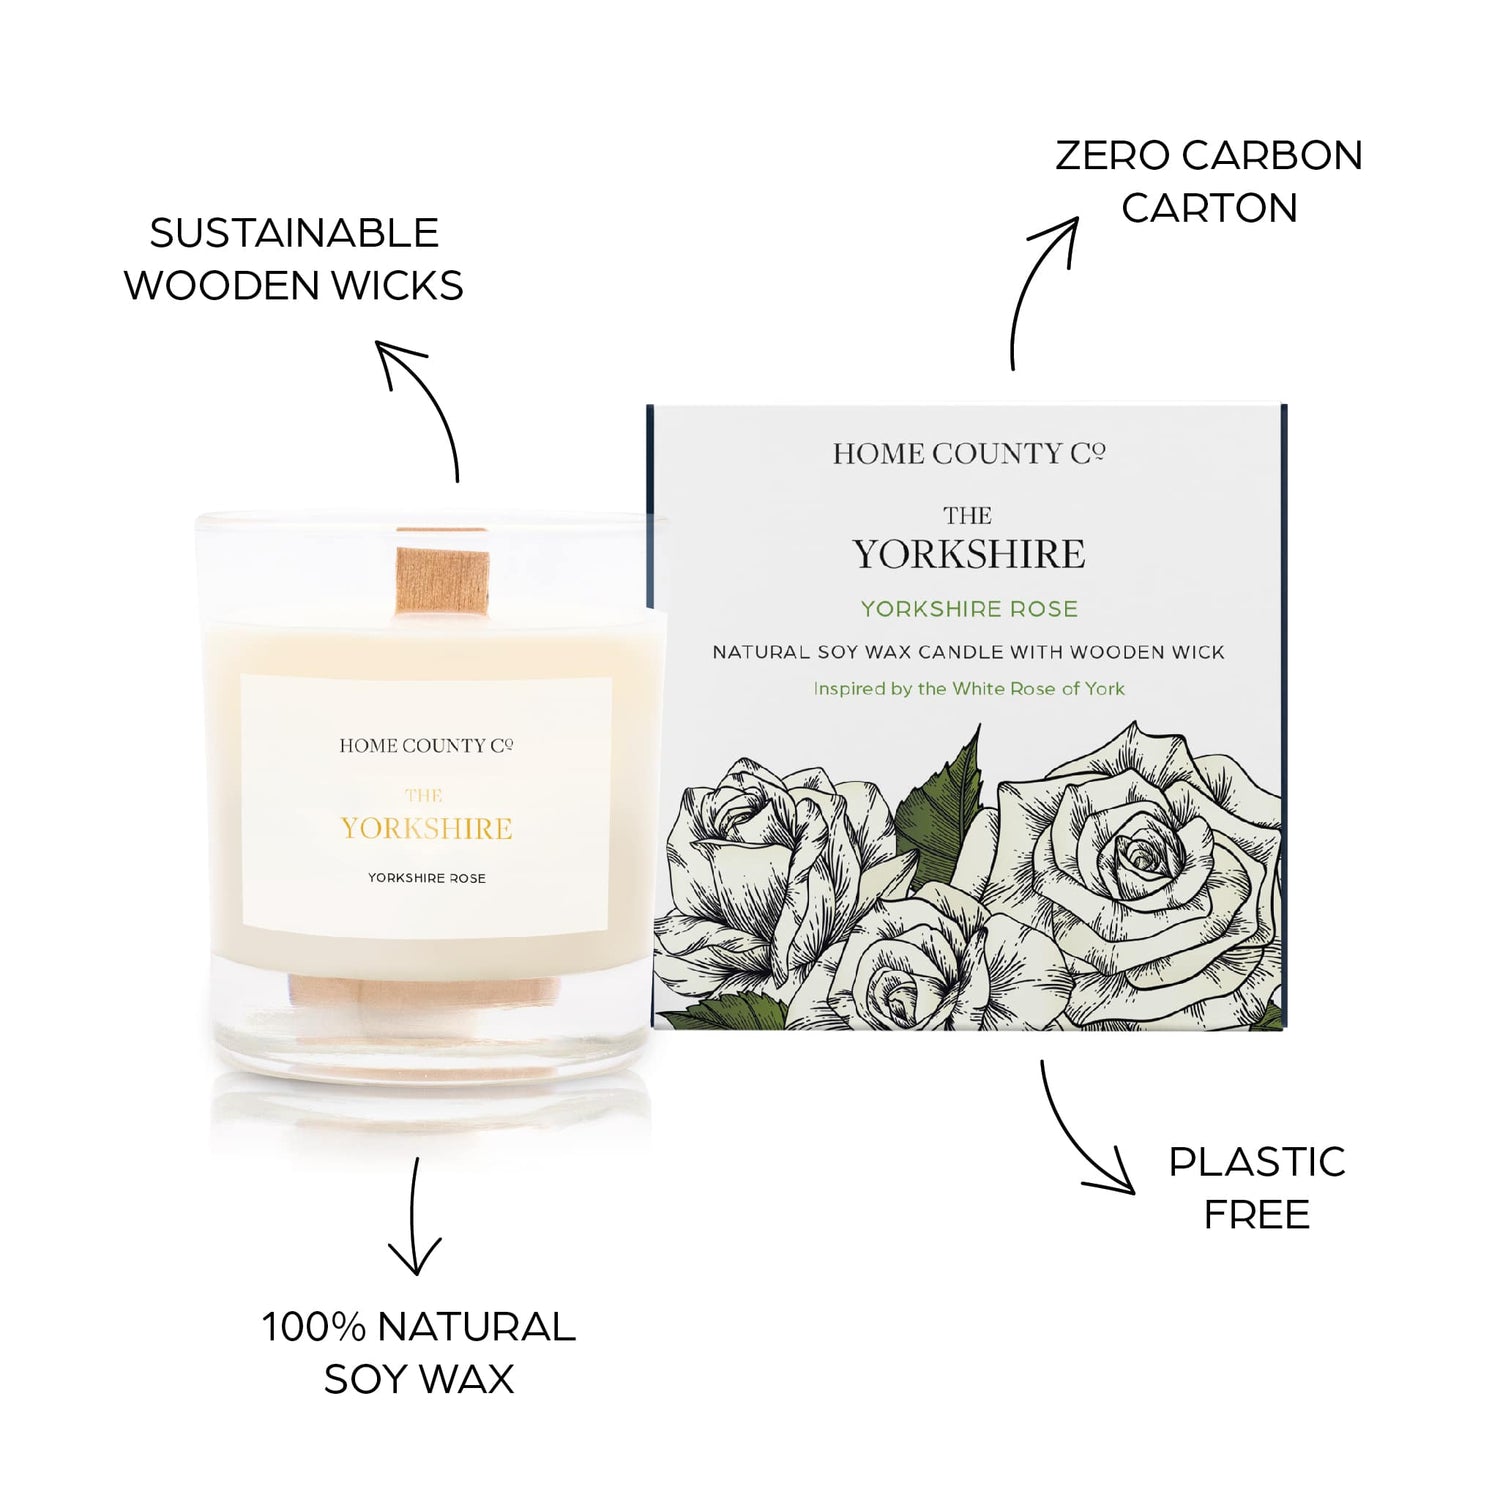 Sustainable candle credentials are shown around the rose scented candle image - sustainable wooden wicks, zero carbon carton, 100% natural soy wax, plastic free